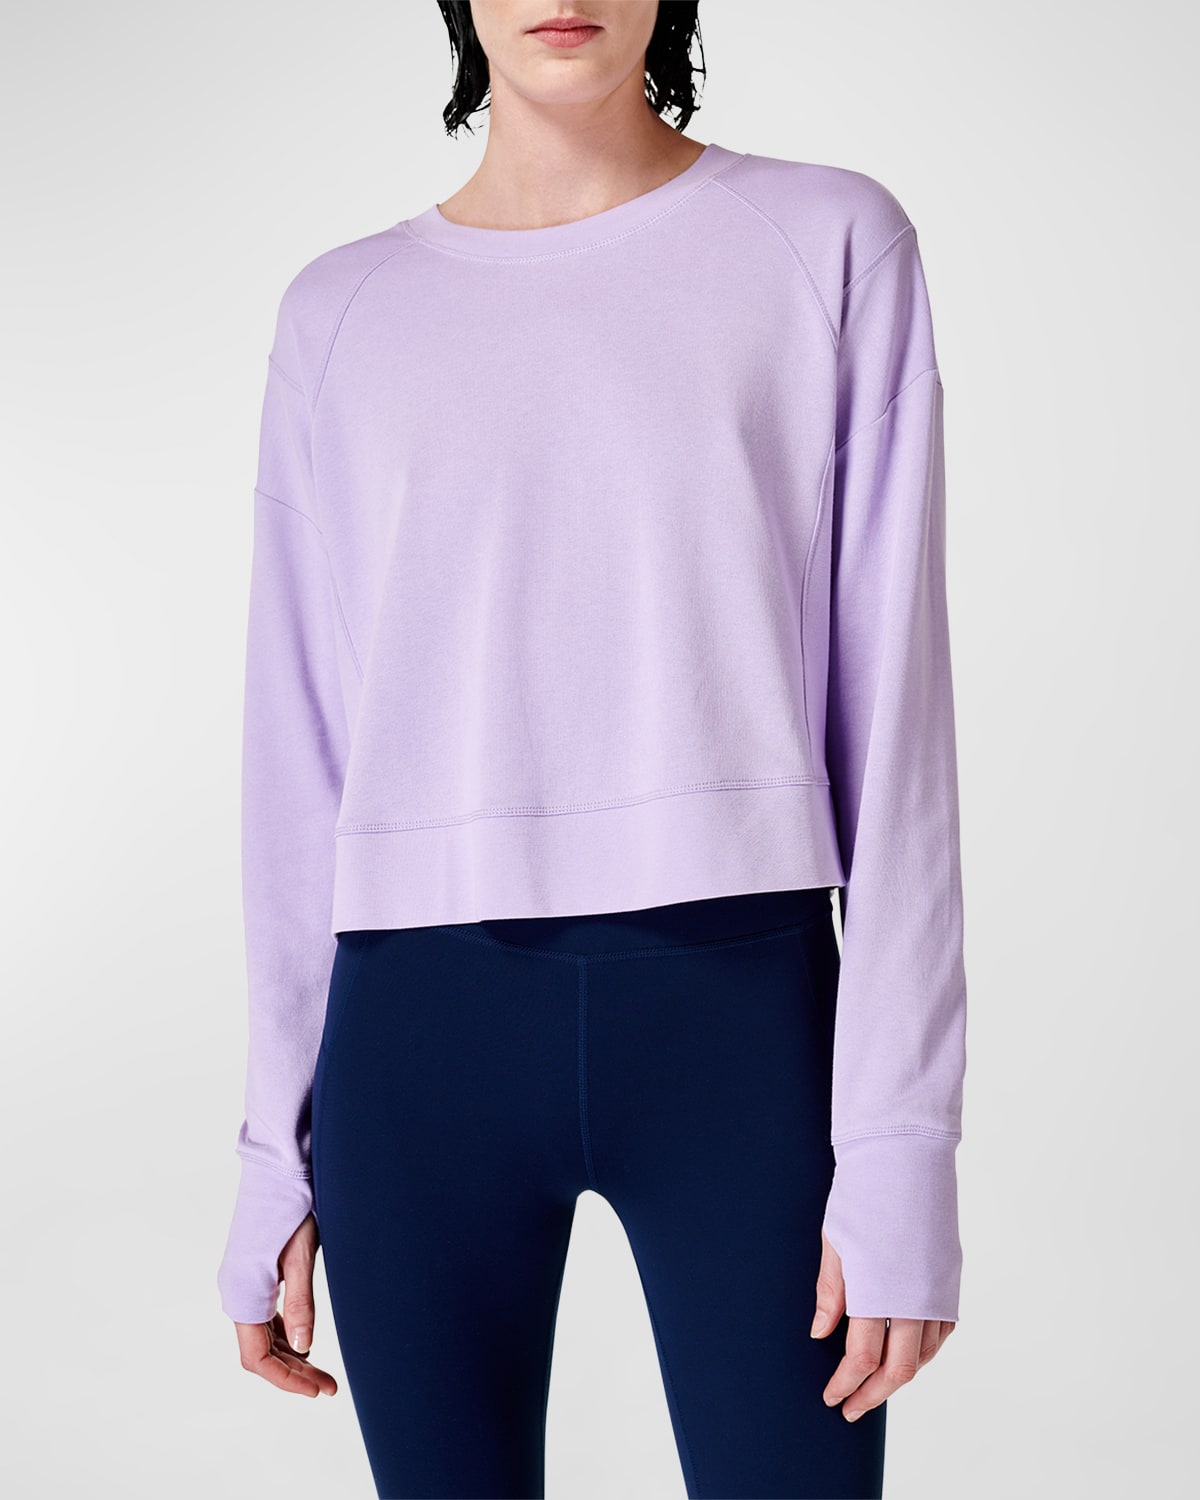 After Class Cropped Sweatshirt